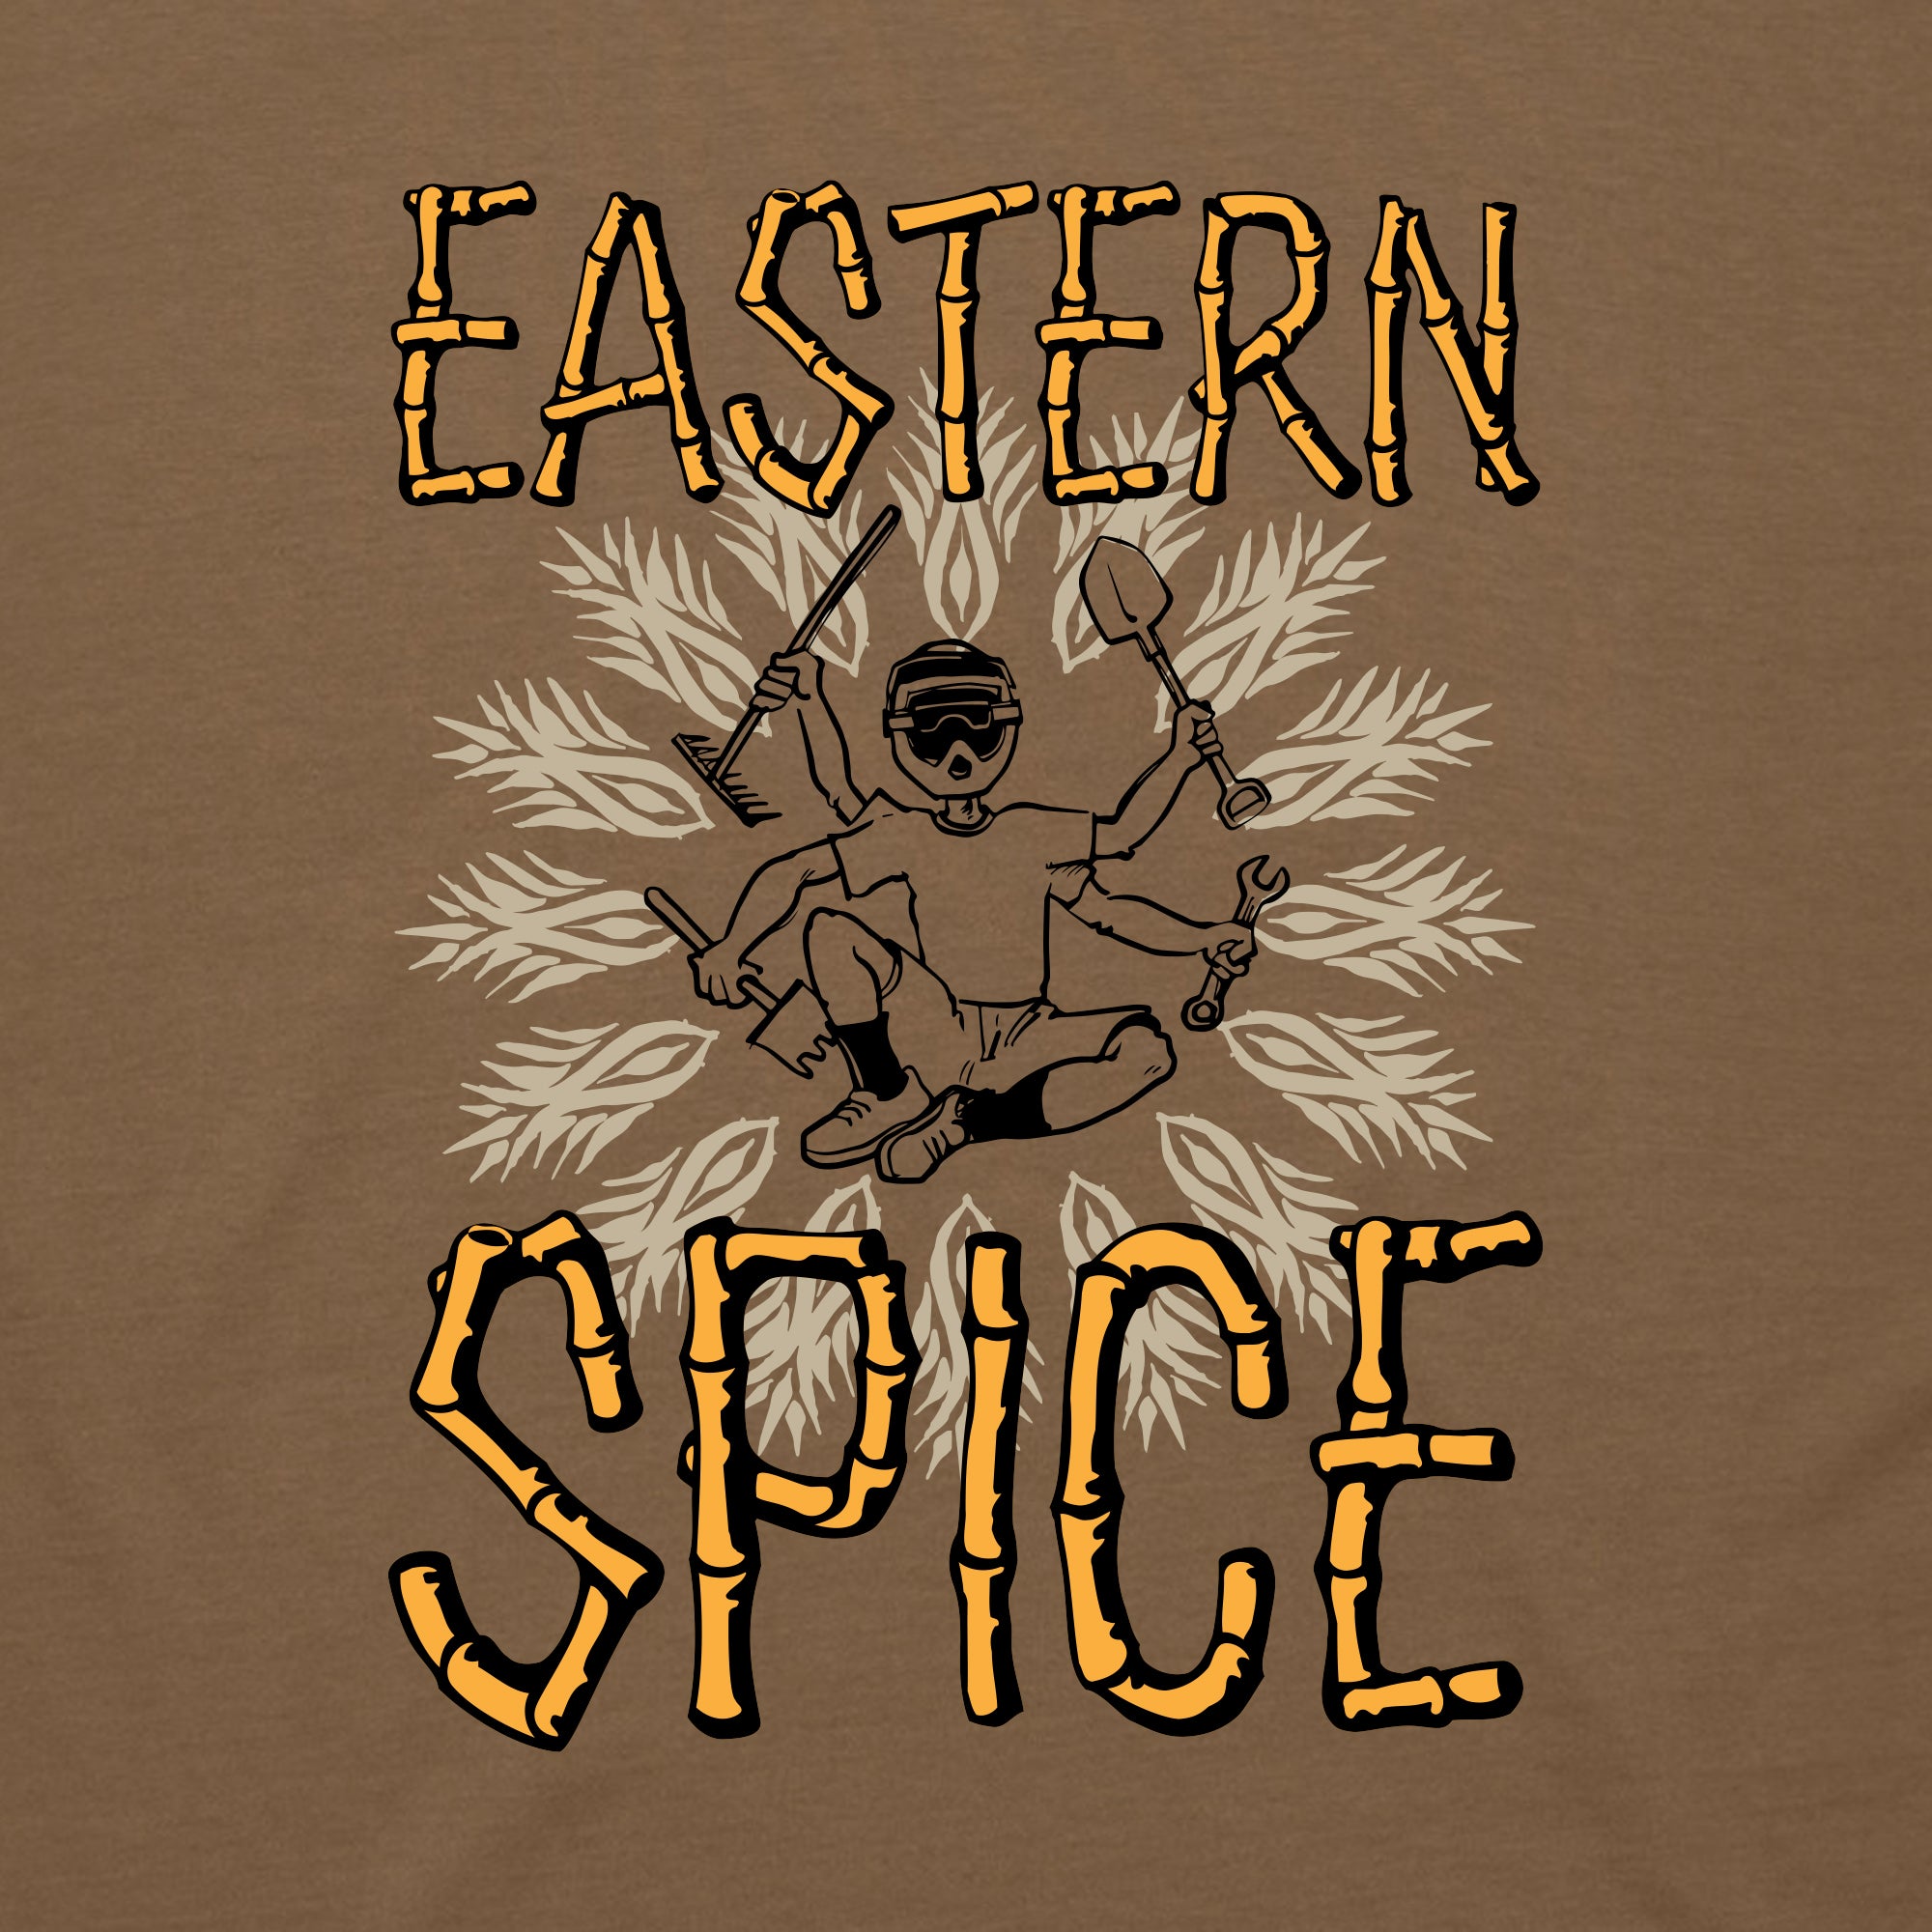 Eastern Spice T